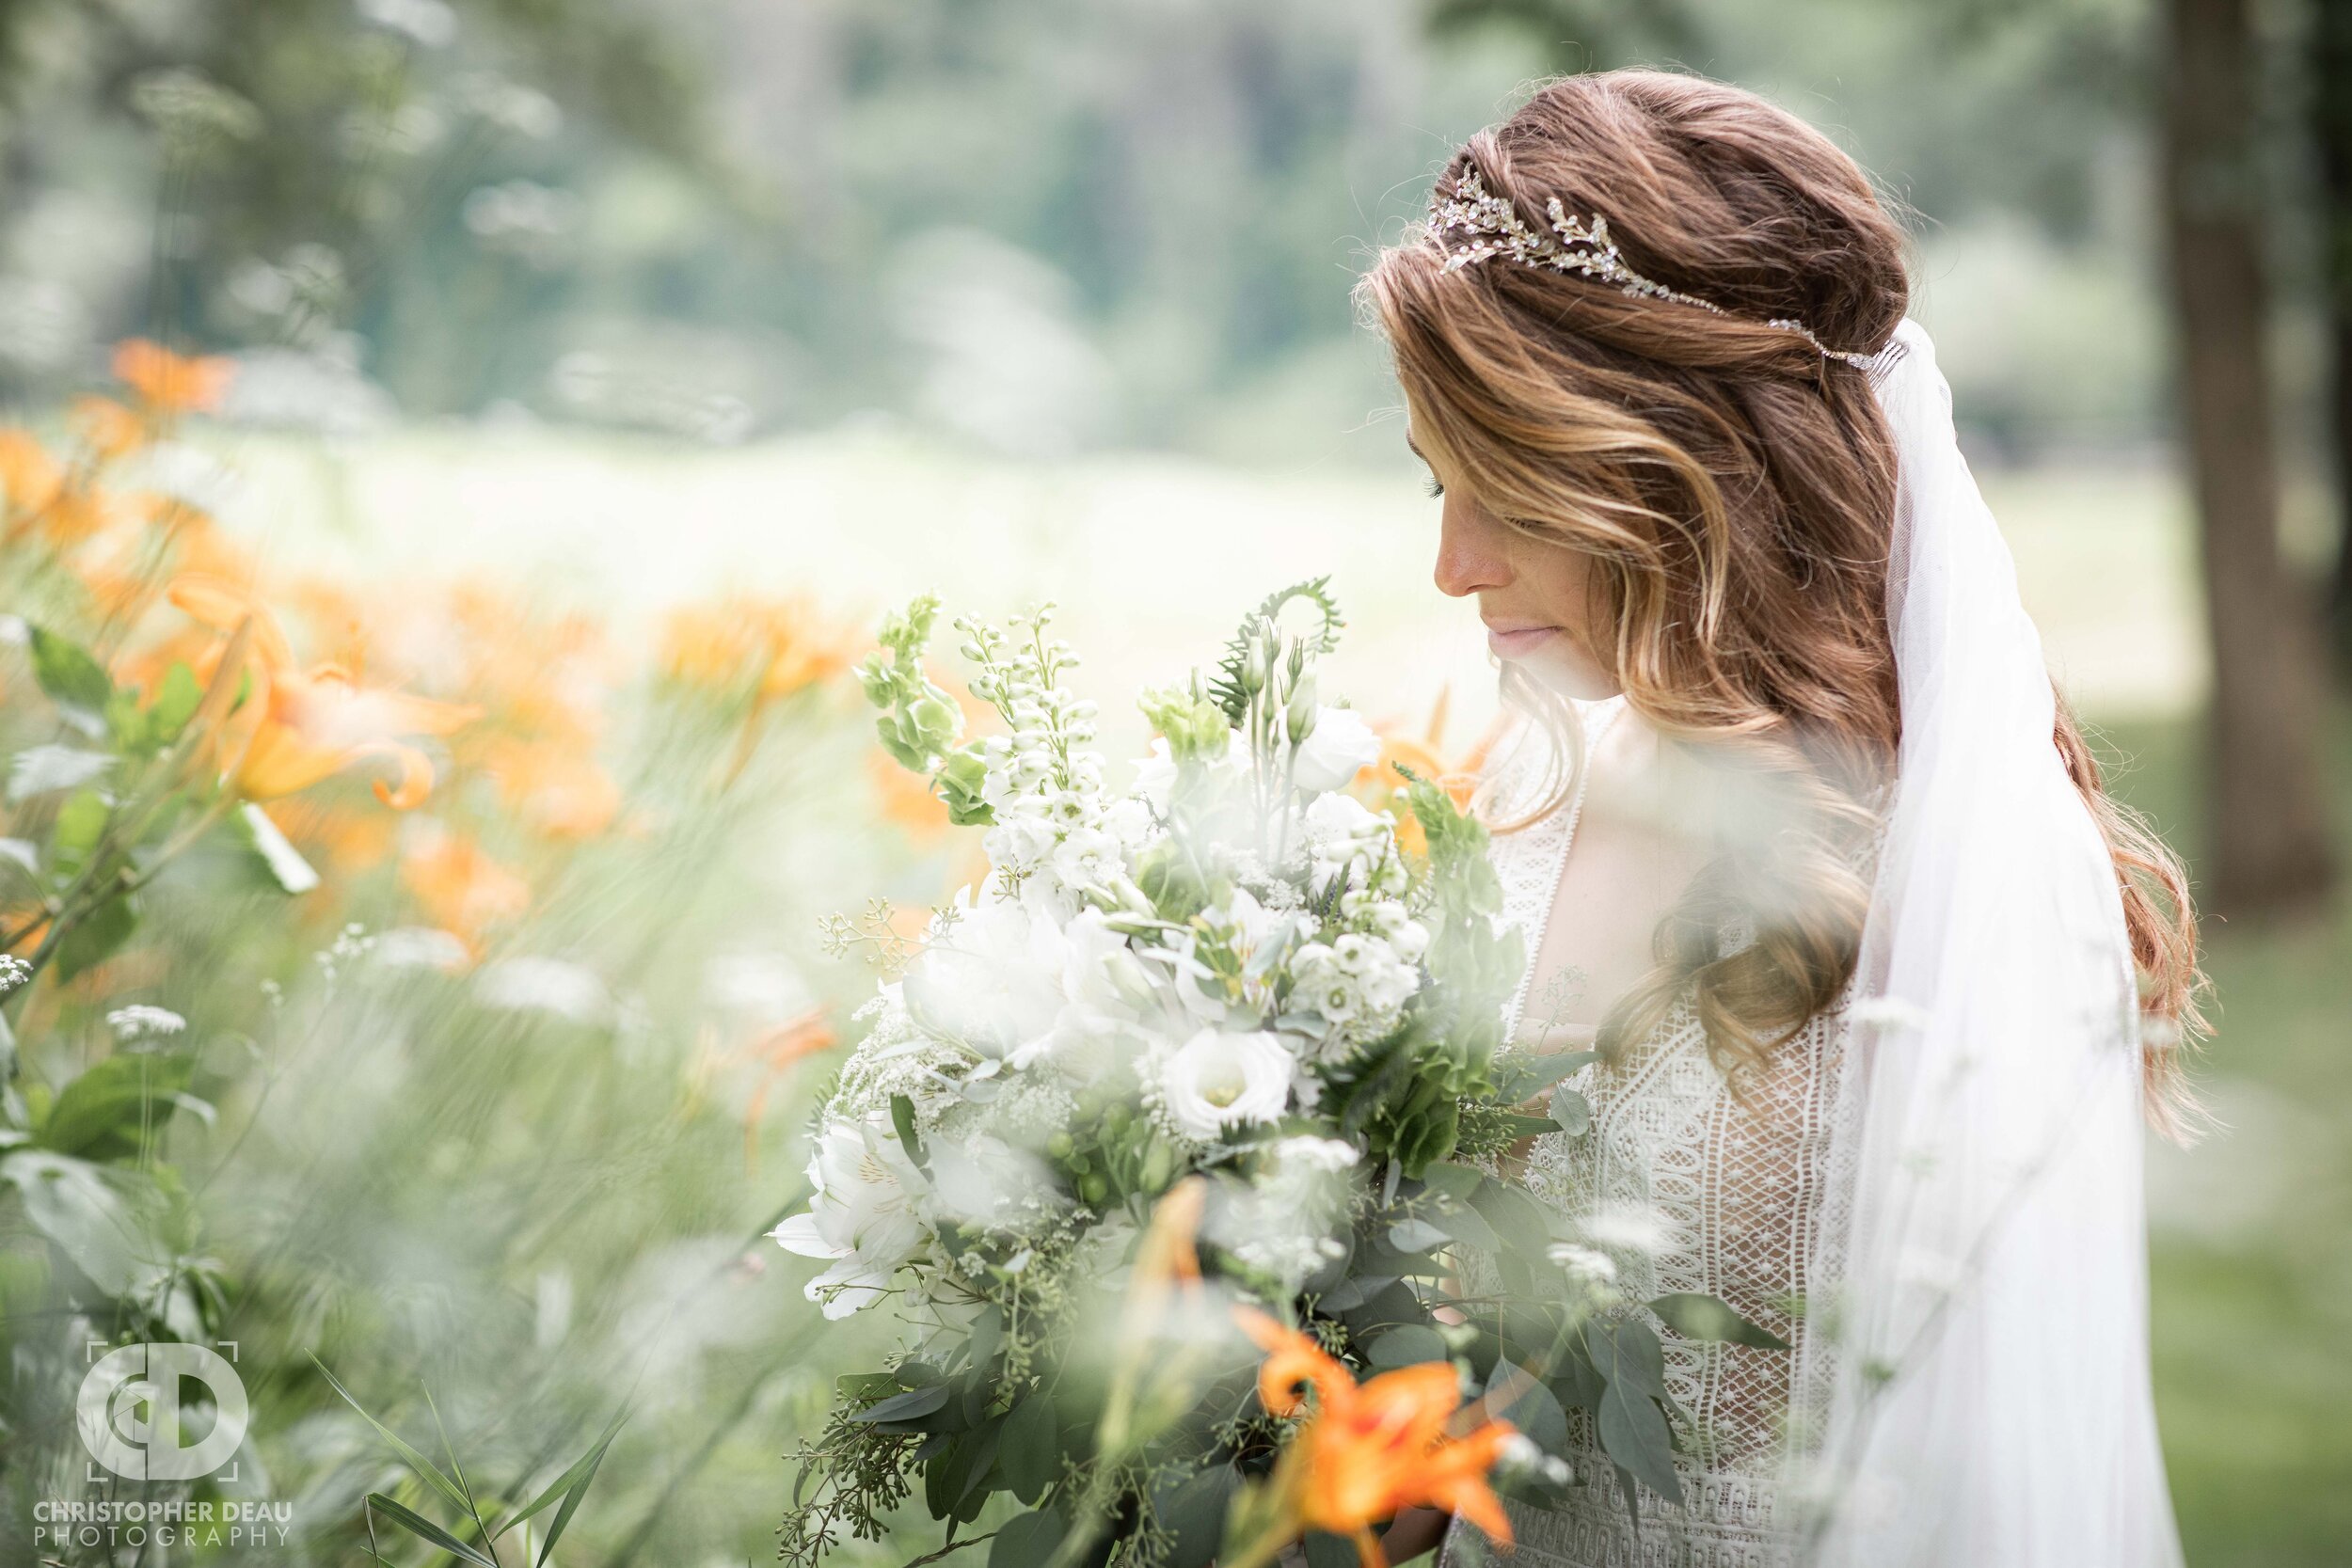  beautiful flowers surrounding a bride as she smells her bouquet  